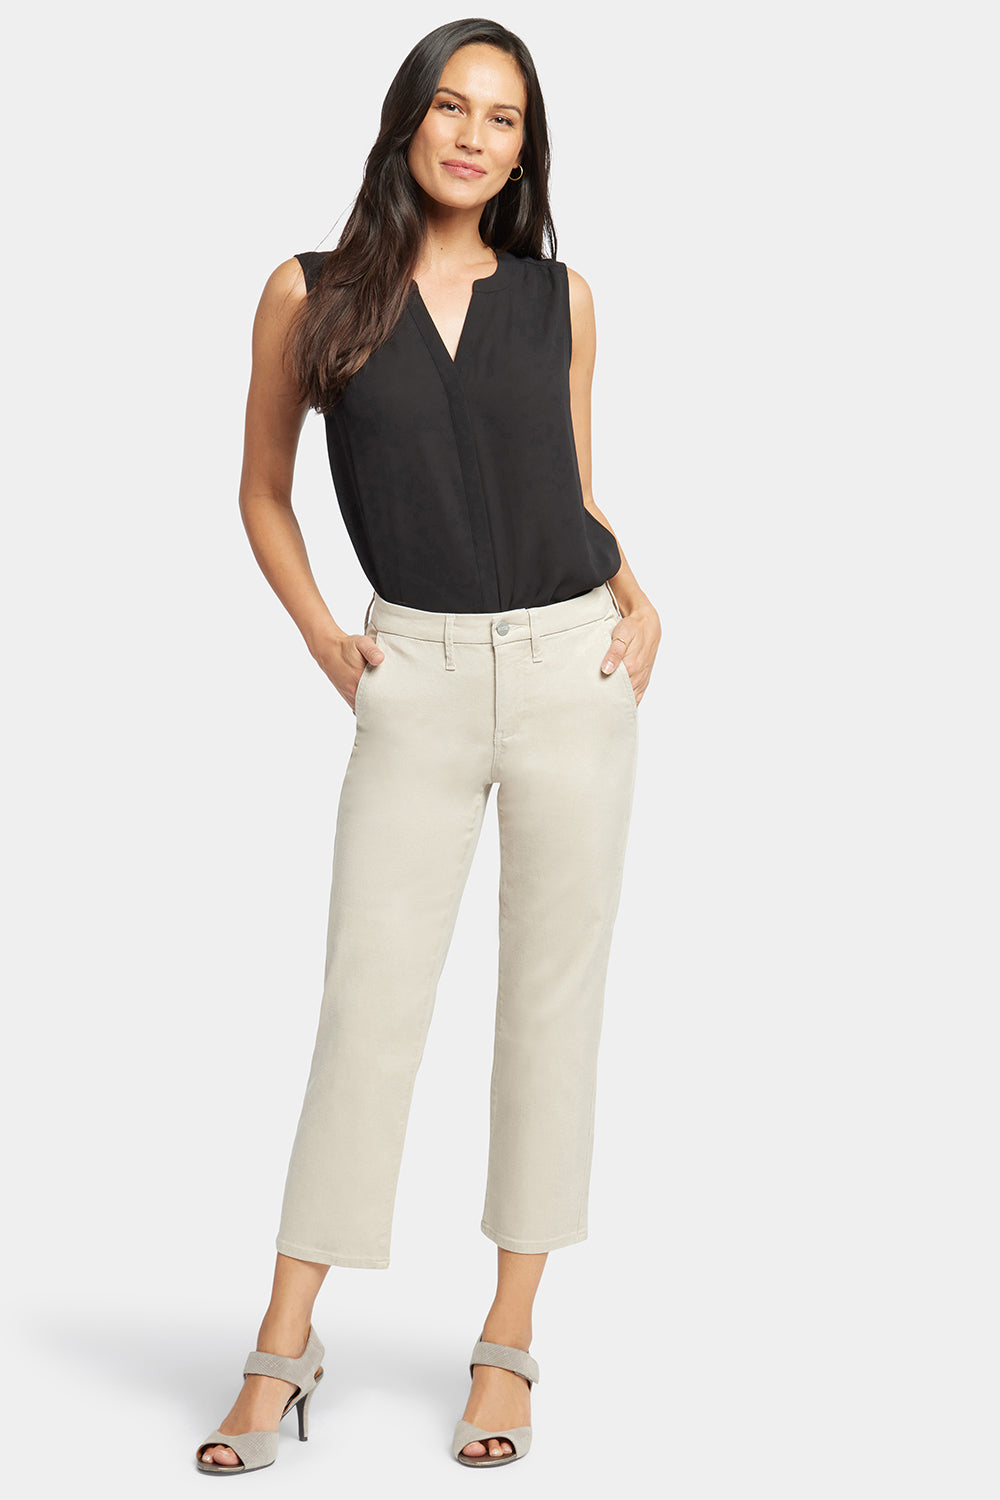 NYDJ Piper Trouser Pants In Stretch Twill - Feather